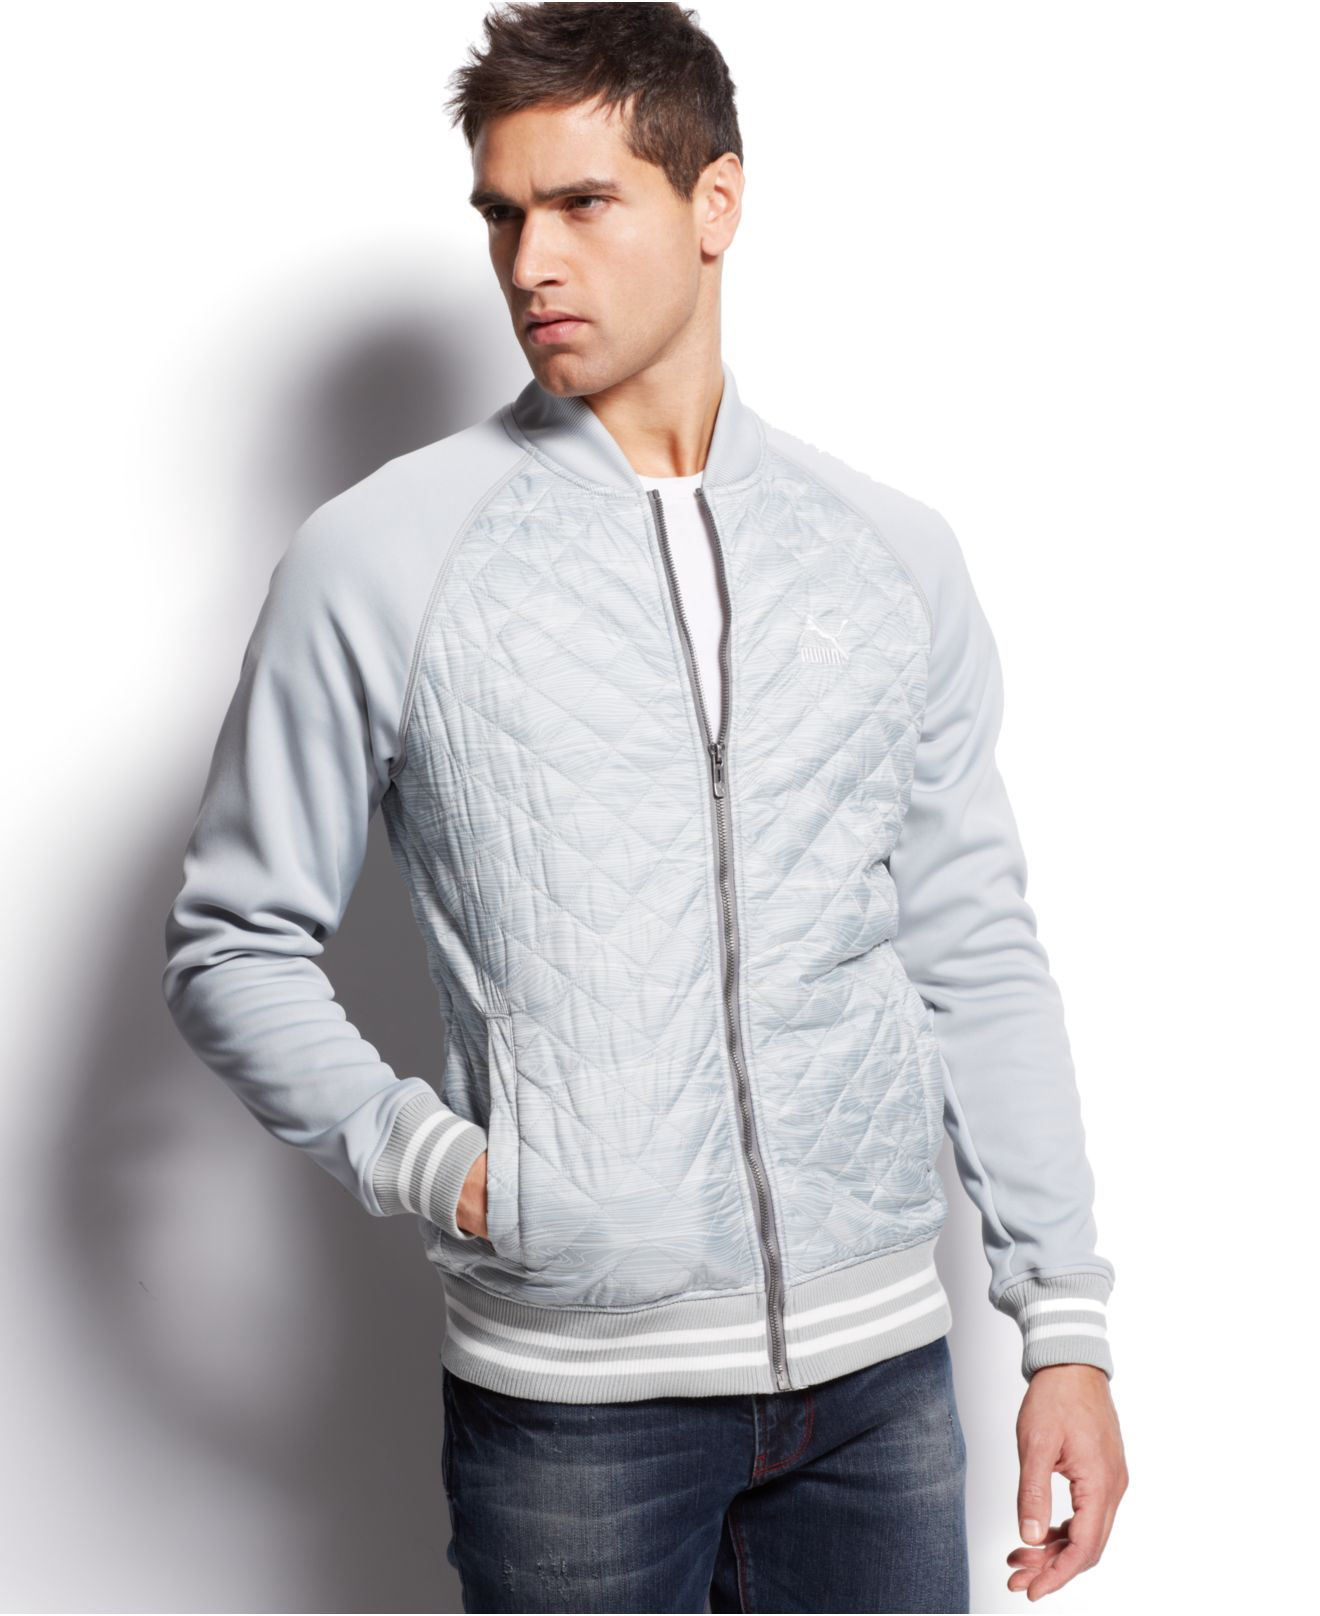 PUMA Lifestyle Quilted Bomber Jacket in Grey (Gray) for Men - Lyst